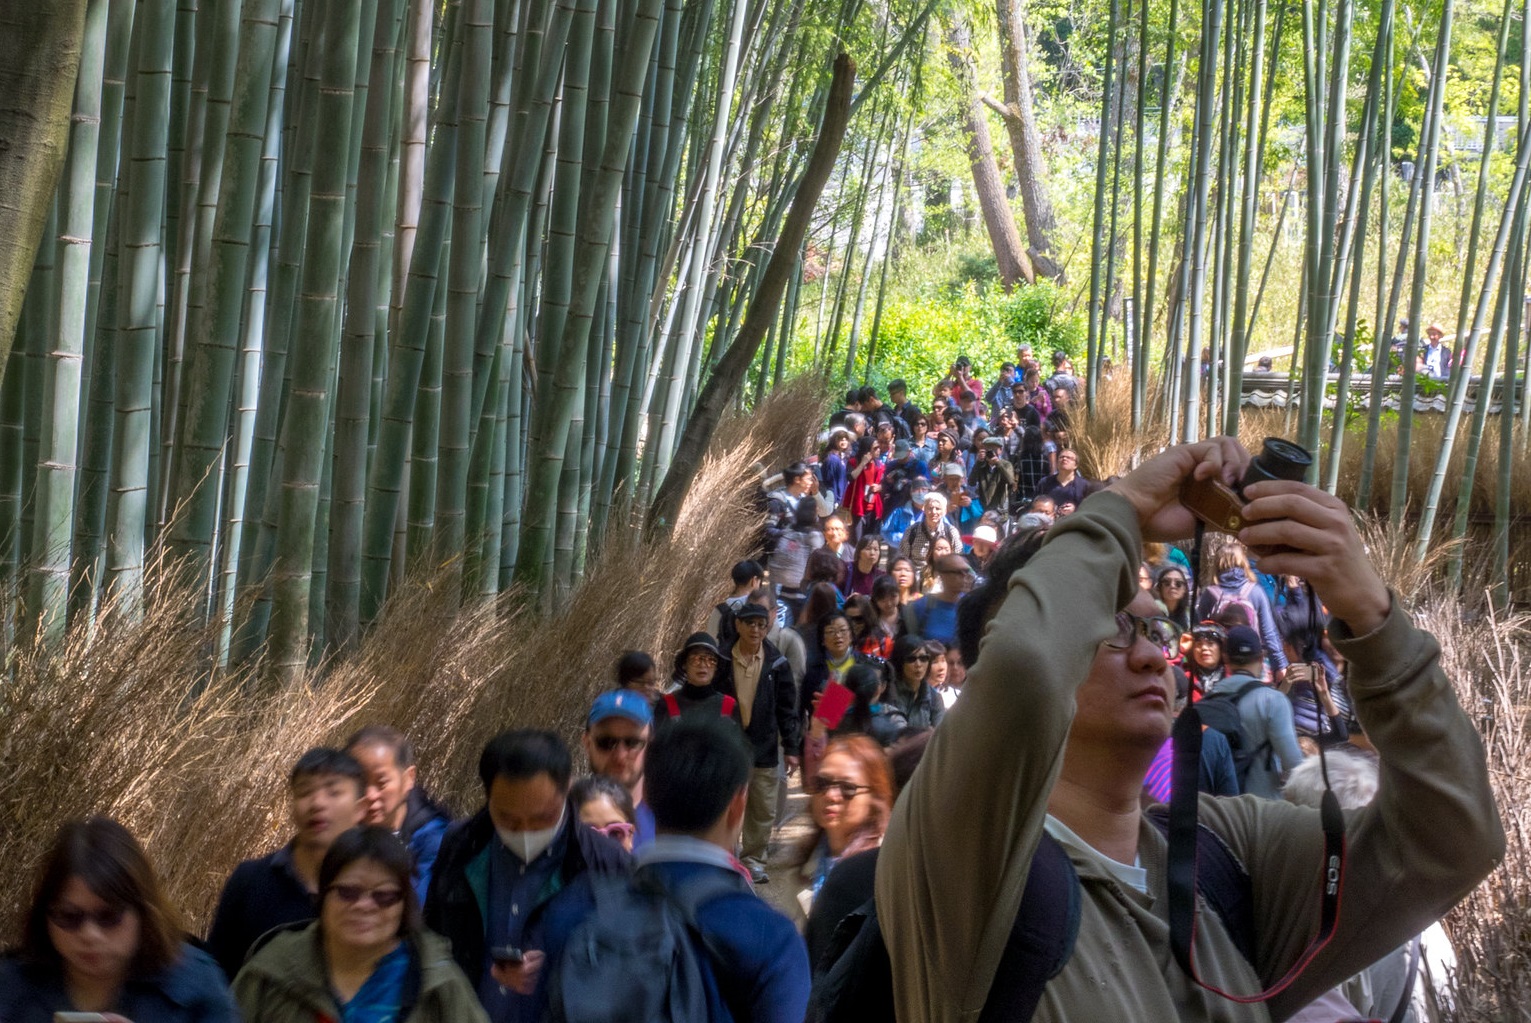 <p>Though undeniably pretty, the so-called "serenity" of the grove is ultimately ruined by the sheer number of tourists. With <strong>selfie-sticks everywhere you look</strong>, it's important to visit the Arashiyma Bamboo Grove with the expectation of sharing the experience with countless others.</p>